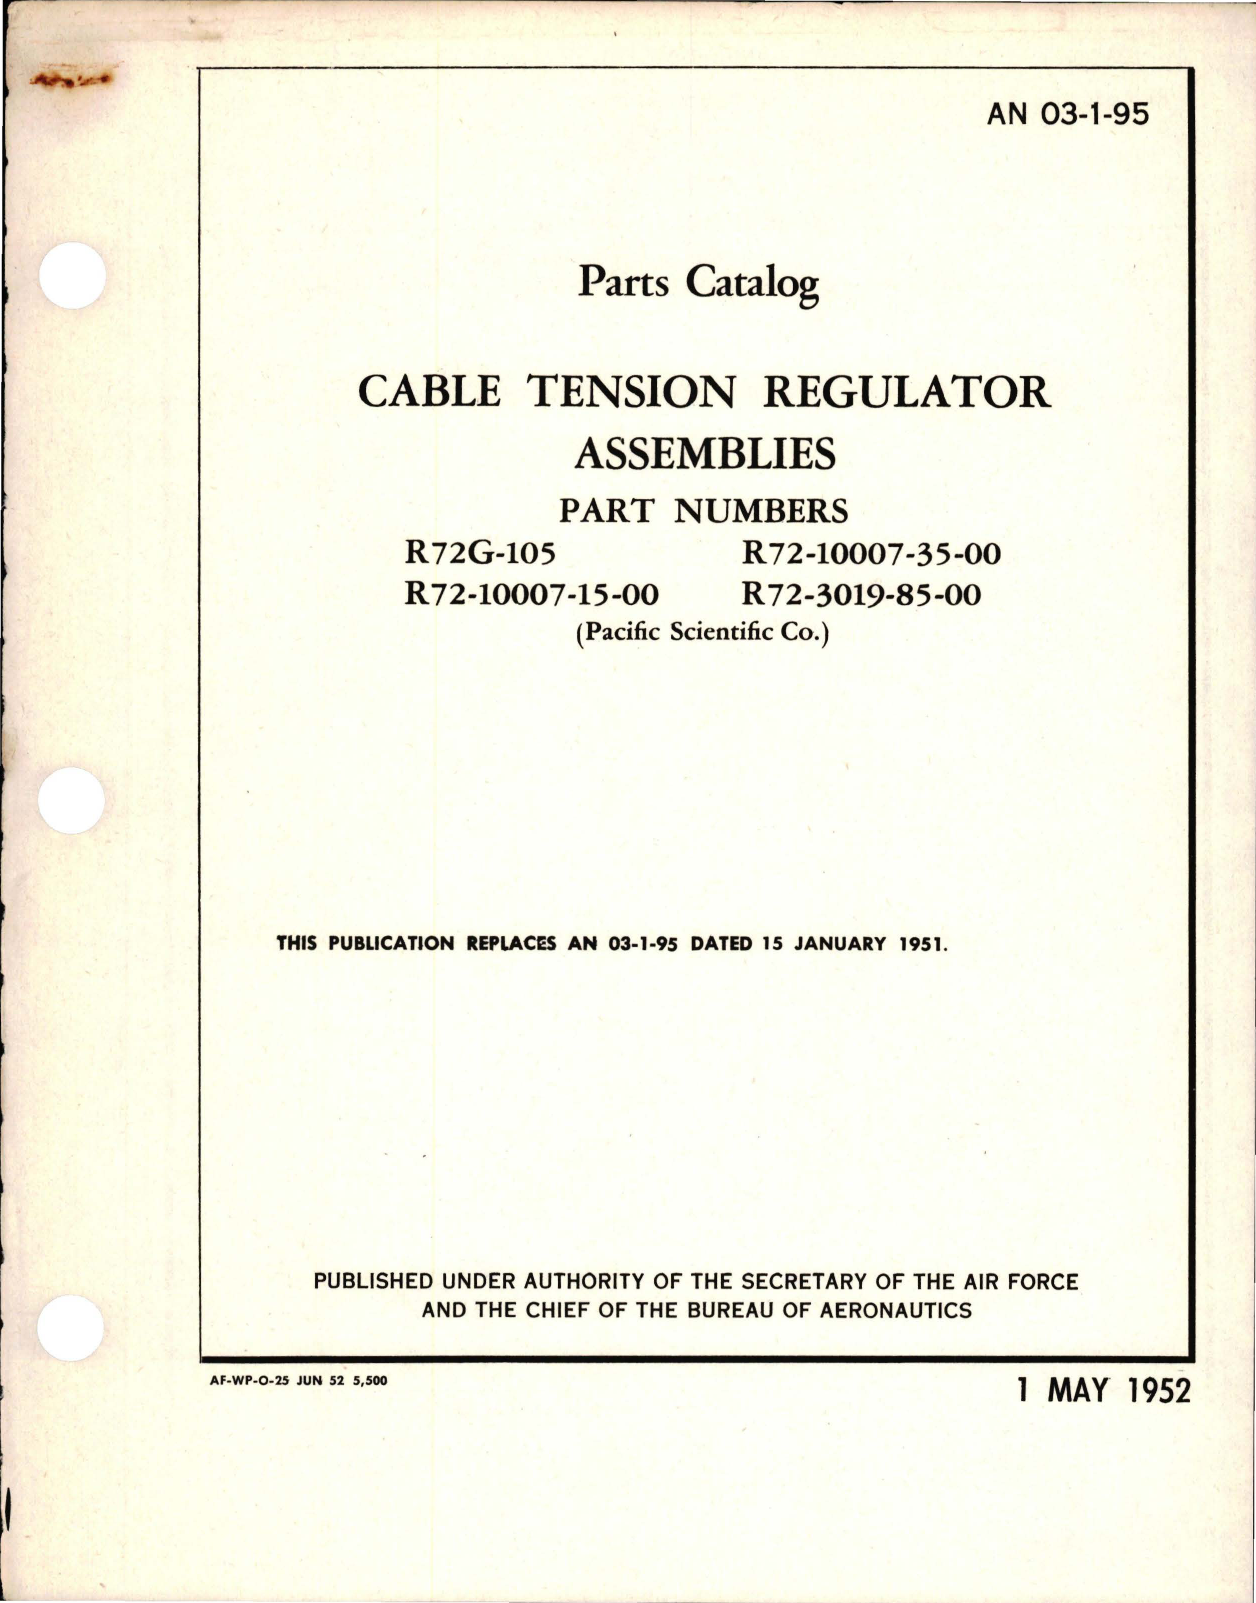 Sample page 1 from AirCorps Library document: Parts Catalog for Cable Tension Regulator Assemblies- Parts R72G-105, R72-10007-15-00, R72-10007-35-00, and R72-3019-85-00